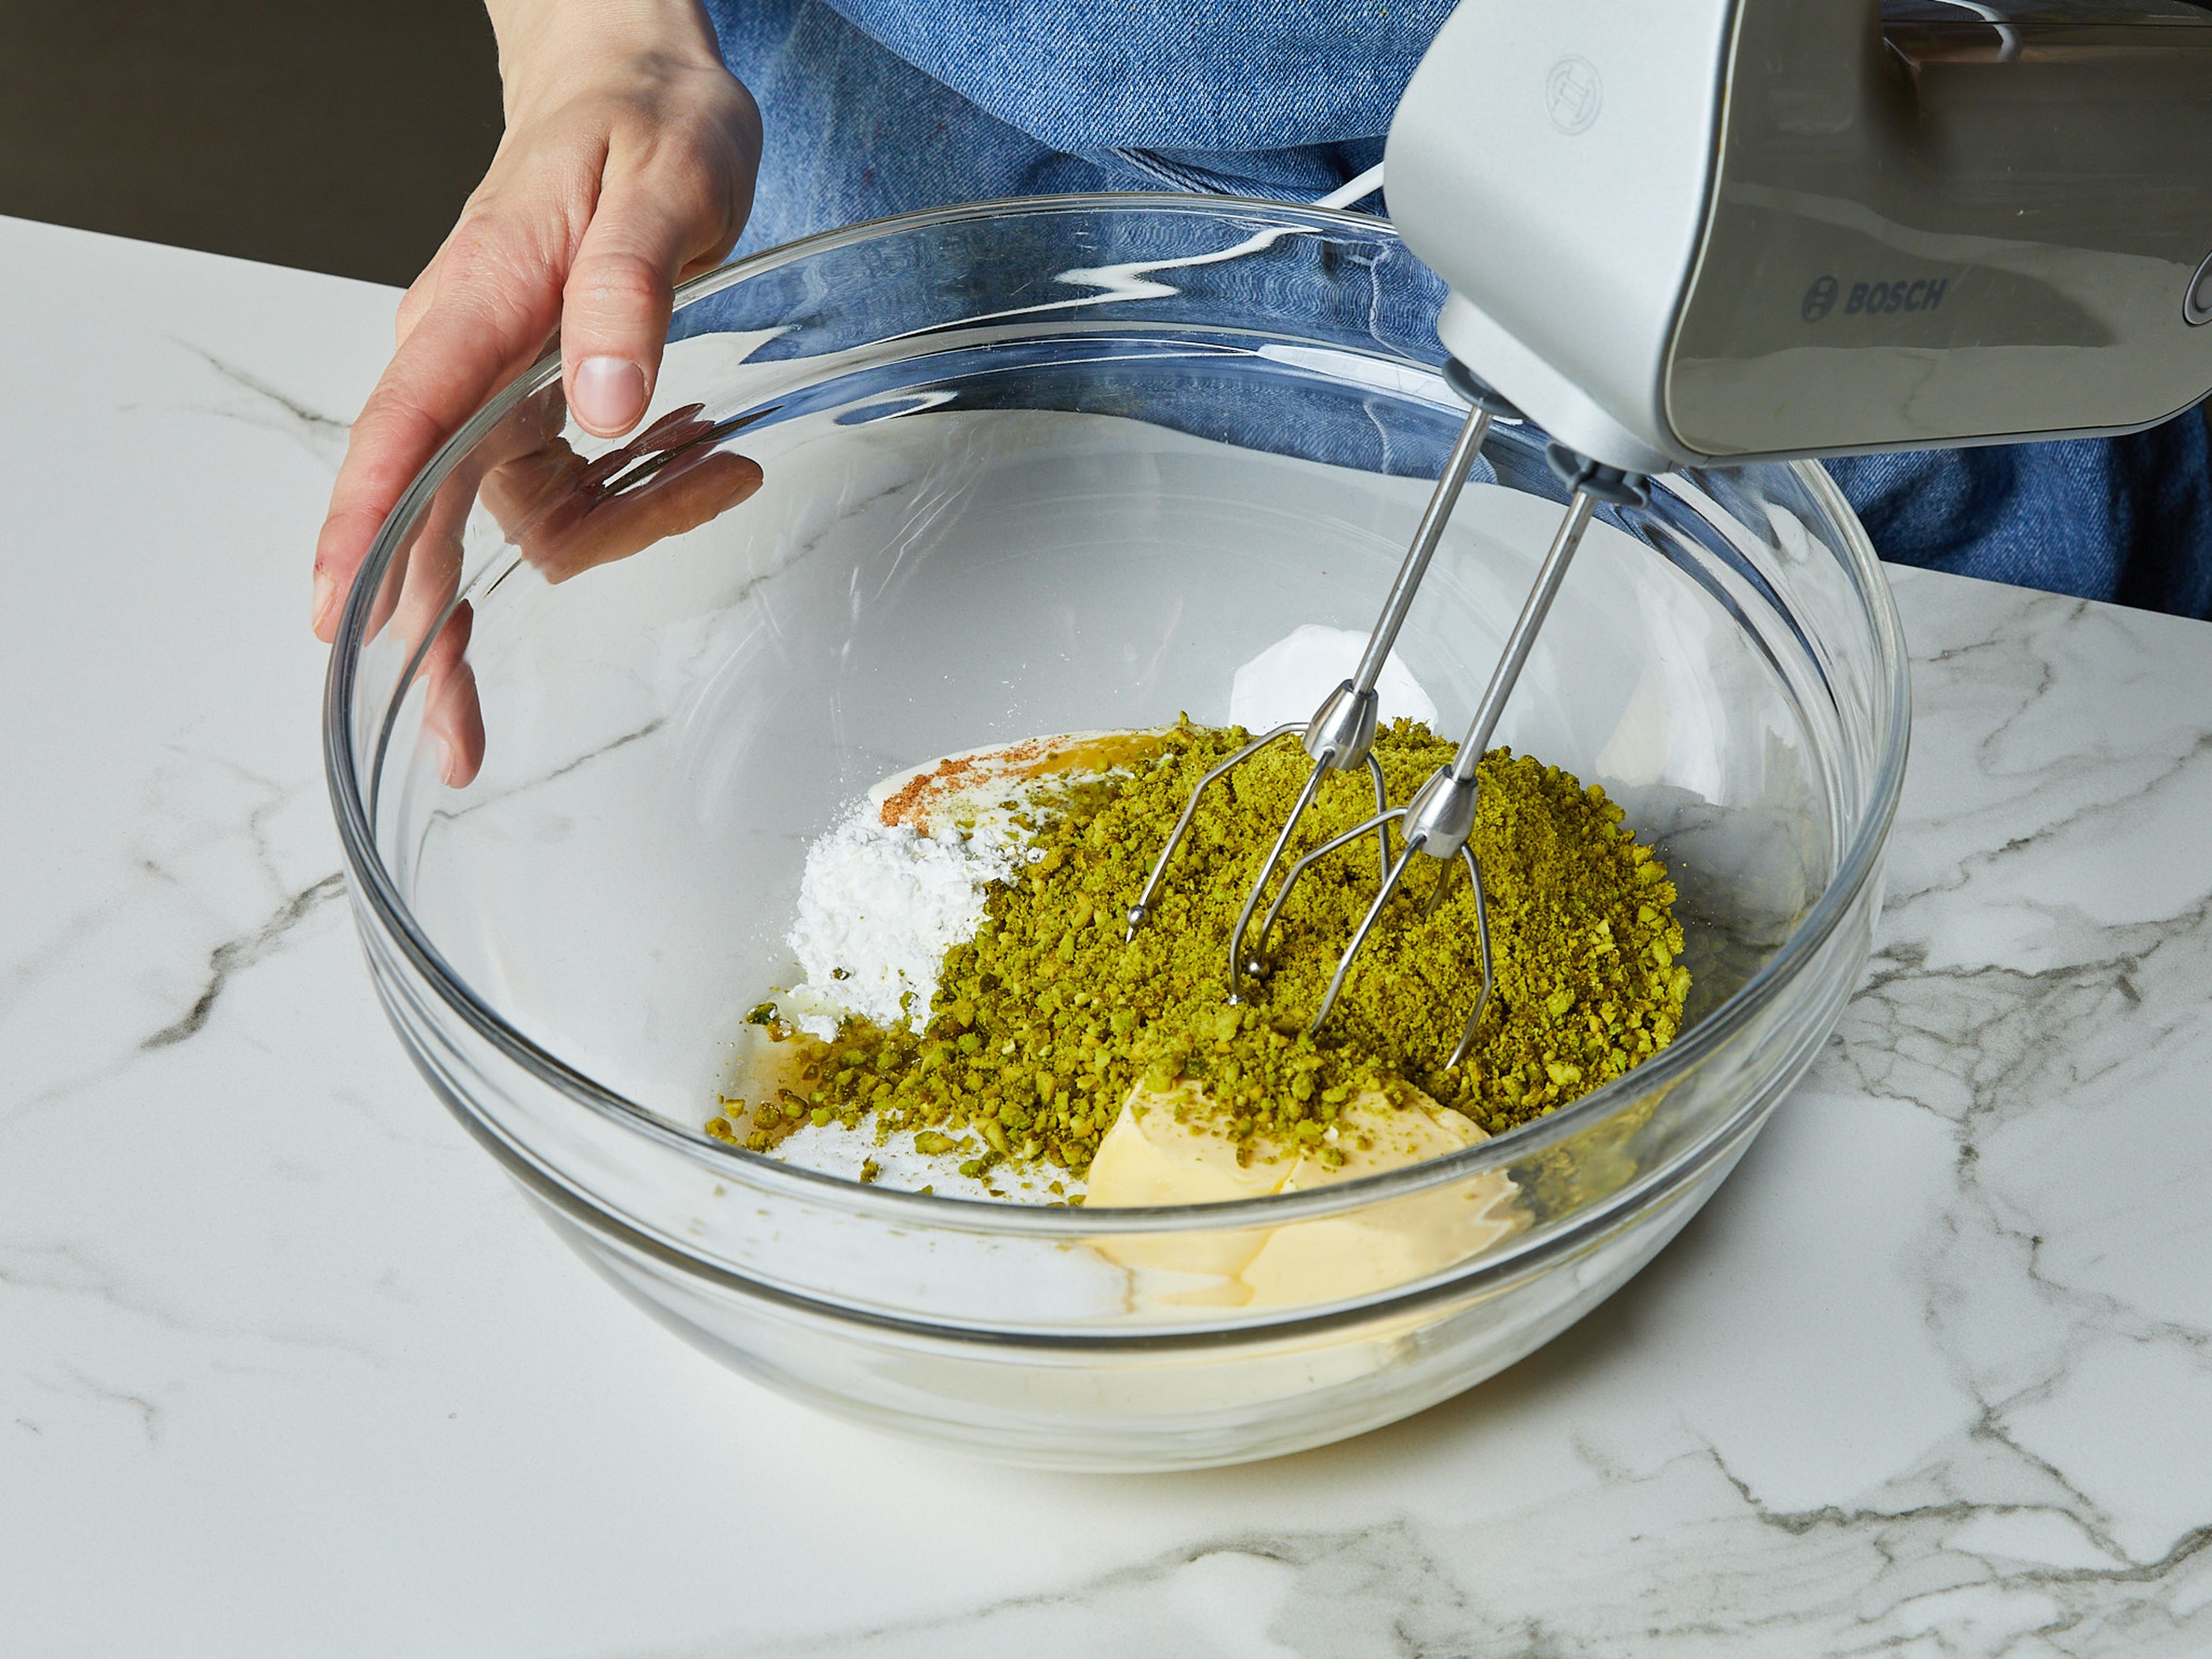 For the filling, chop most of the pistachios very finely using a knife or food processor. Coarsely chop the remaining pistachios, and set aside. Put the pistachio flour into a large bowl and whip it with starch, salt, room temperature butter, vanilla extract, eggs, heavy cream, ground cinnamon, ground cardamom, and remaining sugar for approx. 2–3 min. with a hand mixer until fluffy.